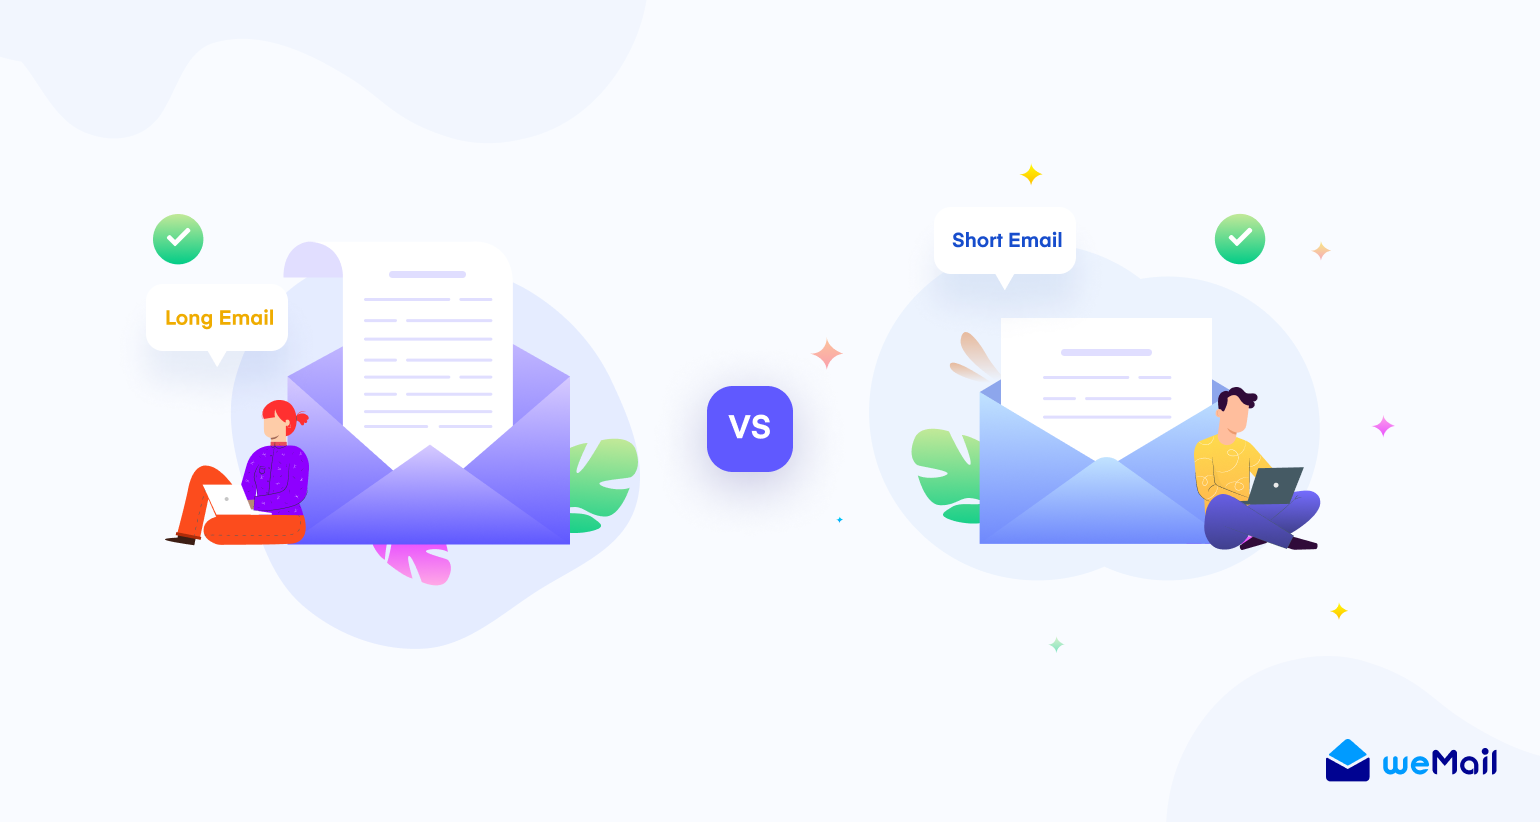 Why short emails are better?